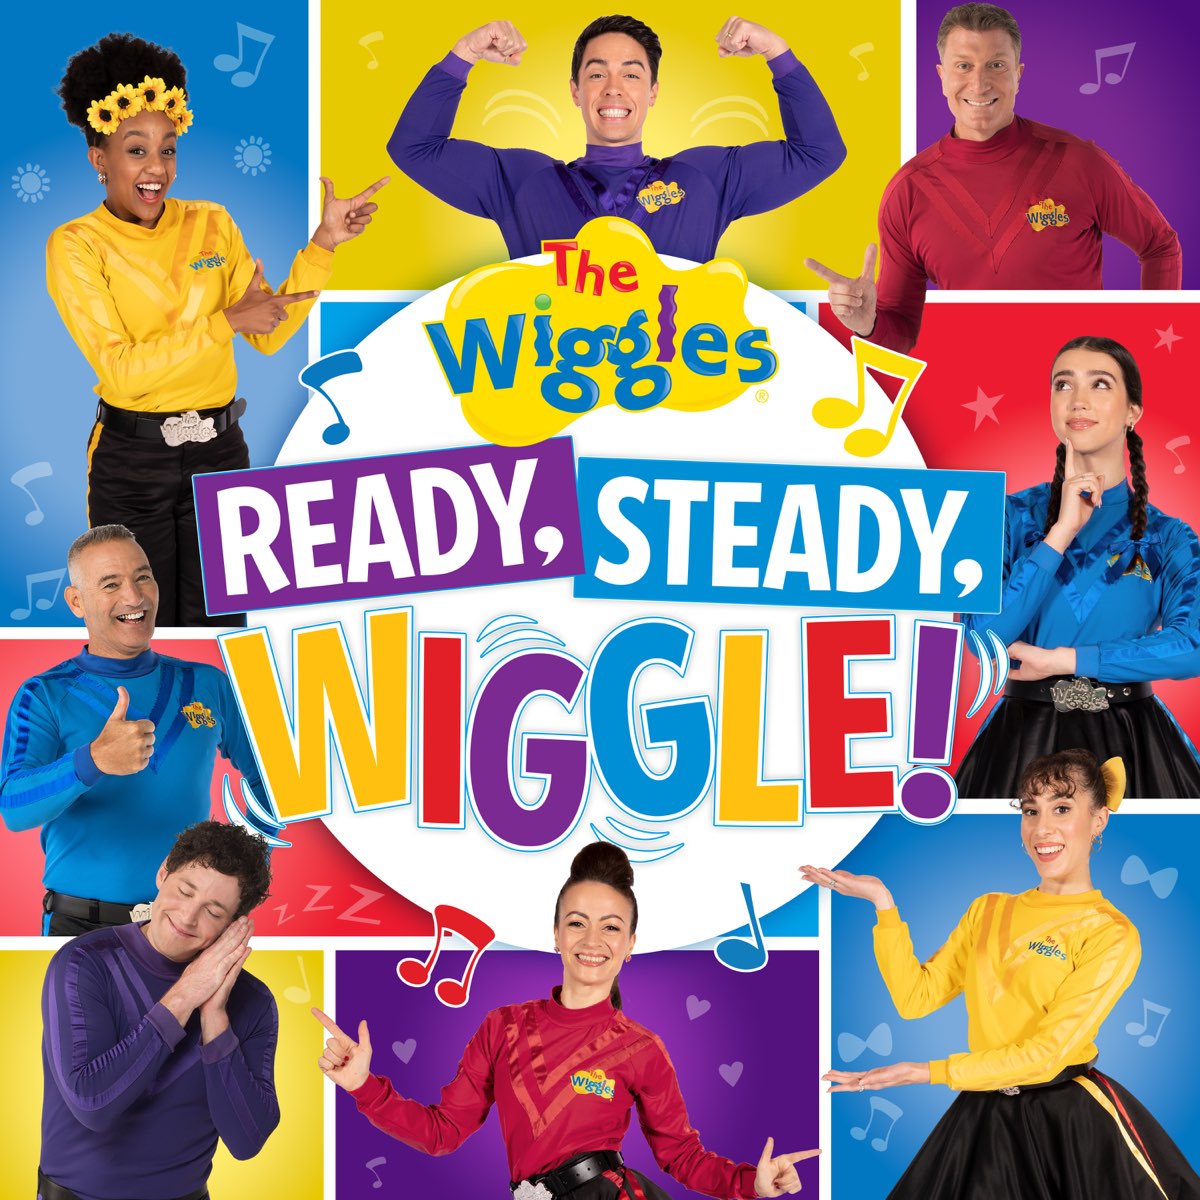 ‎Ready, Steady, Wiggle! by The Wiggles on Apple Music